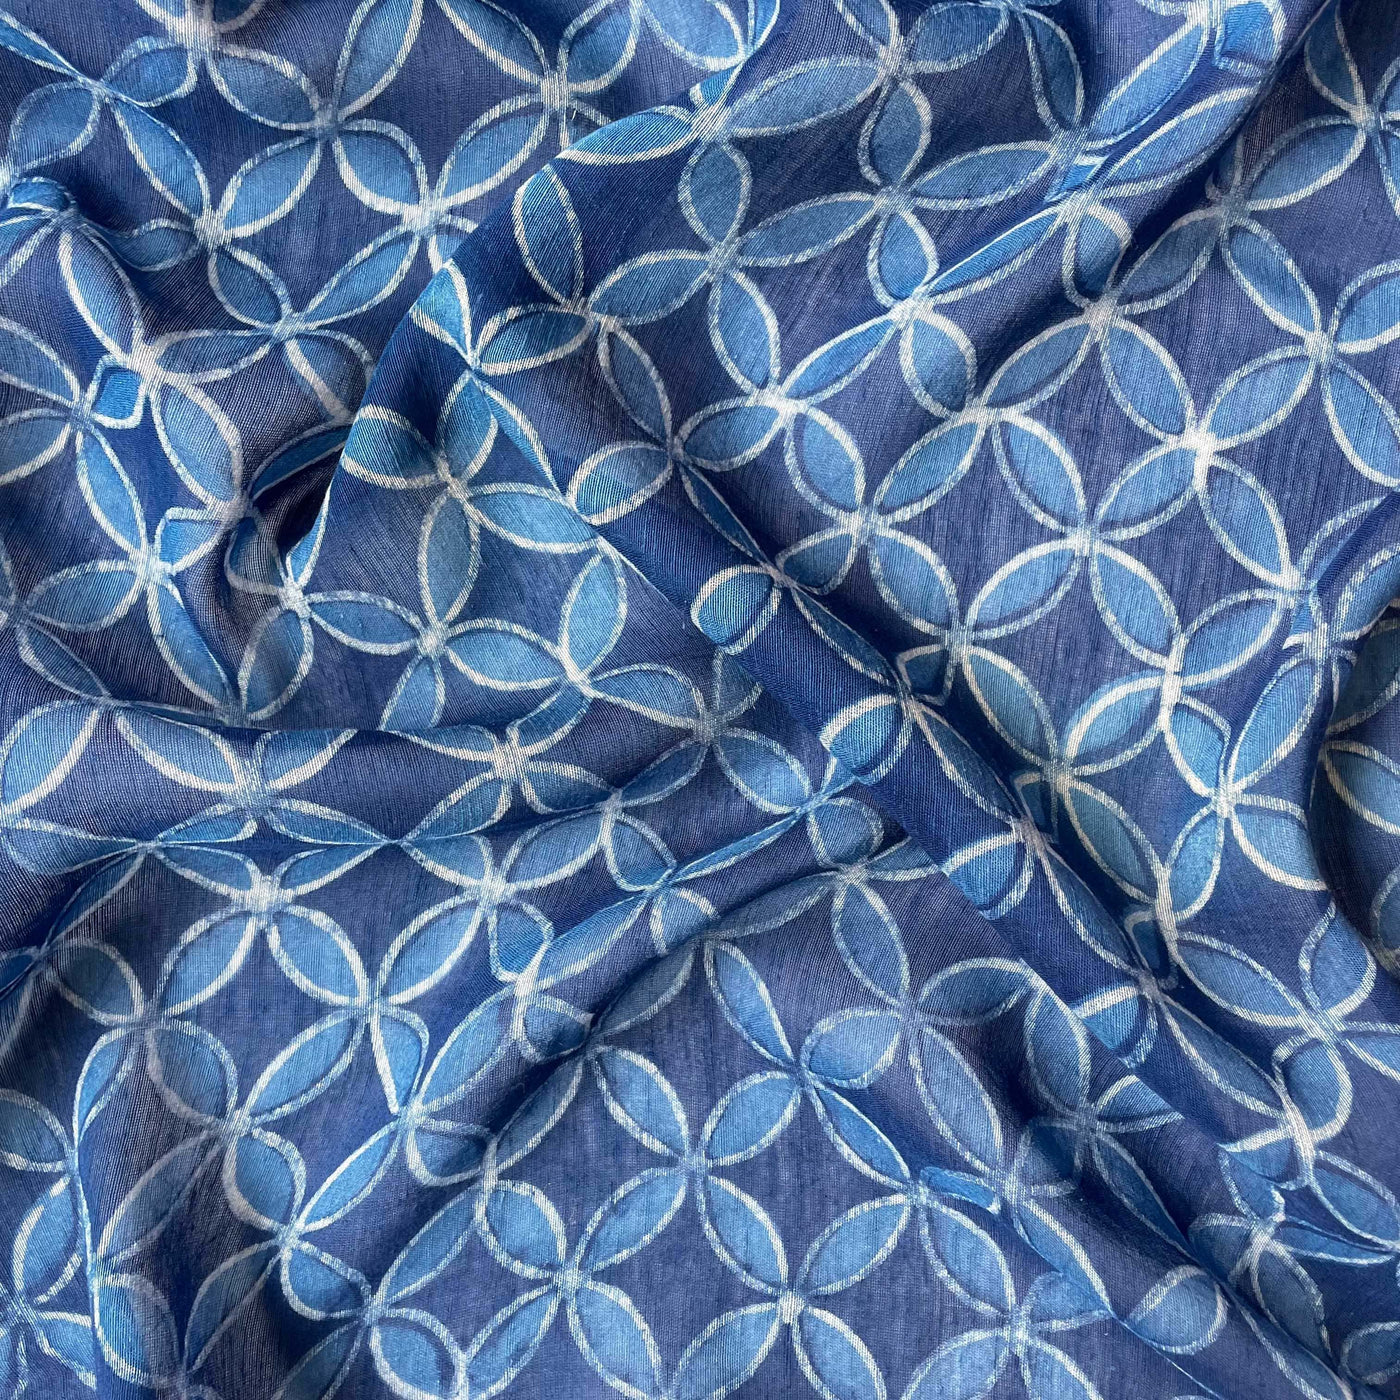 Hand Block Printed Cotton Fabric Fabric Indigo Dabu Natural Dyed Abstract Jaal Hand Block Printed Pure Silk Linen Fabric (Width 39 Inches)